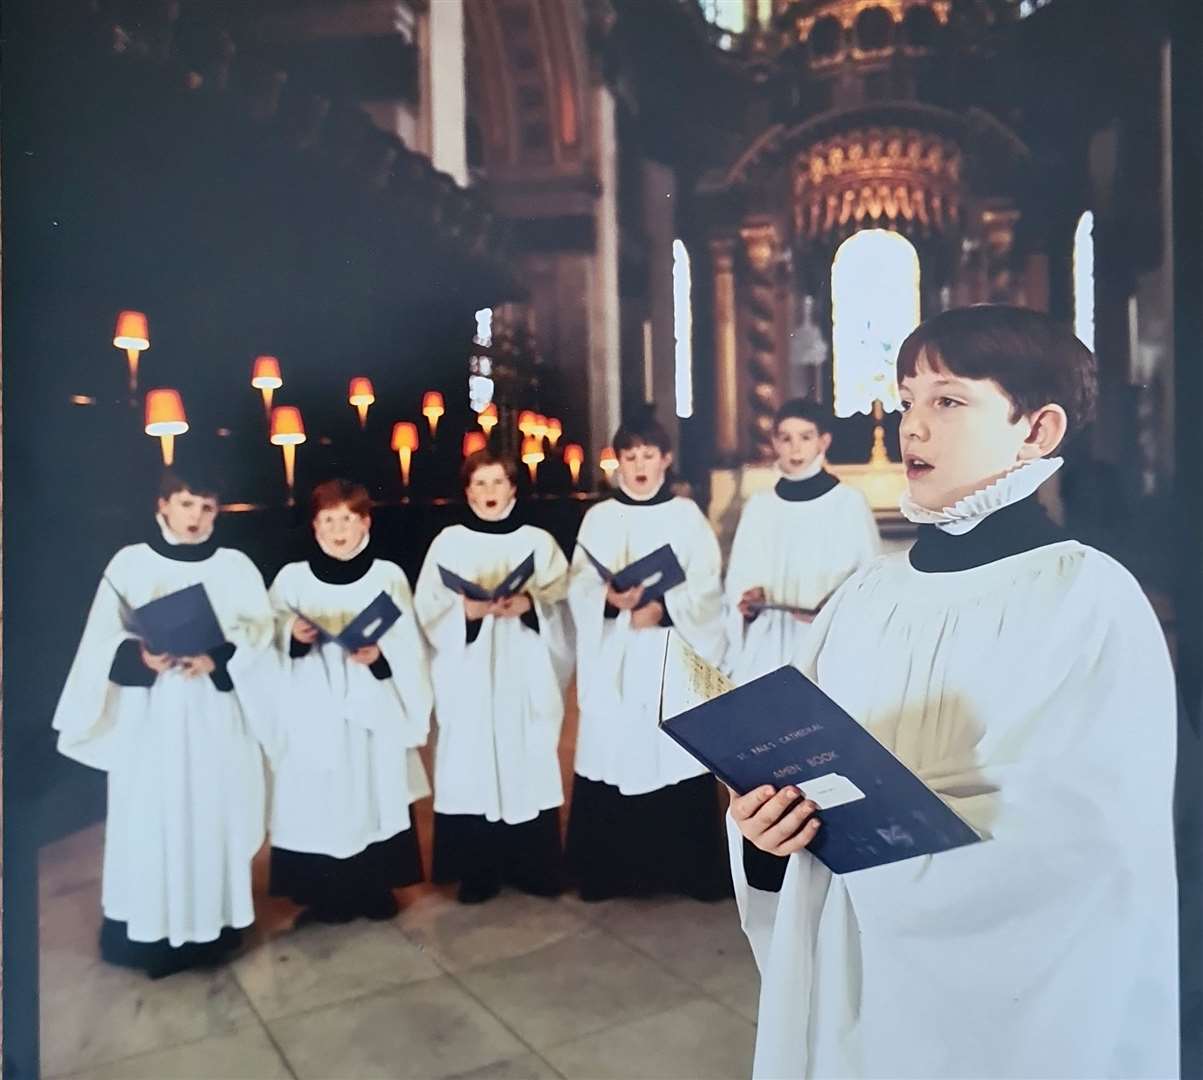 Tom Appleton (foreground) in St Paul's Cathedral Choir